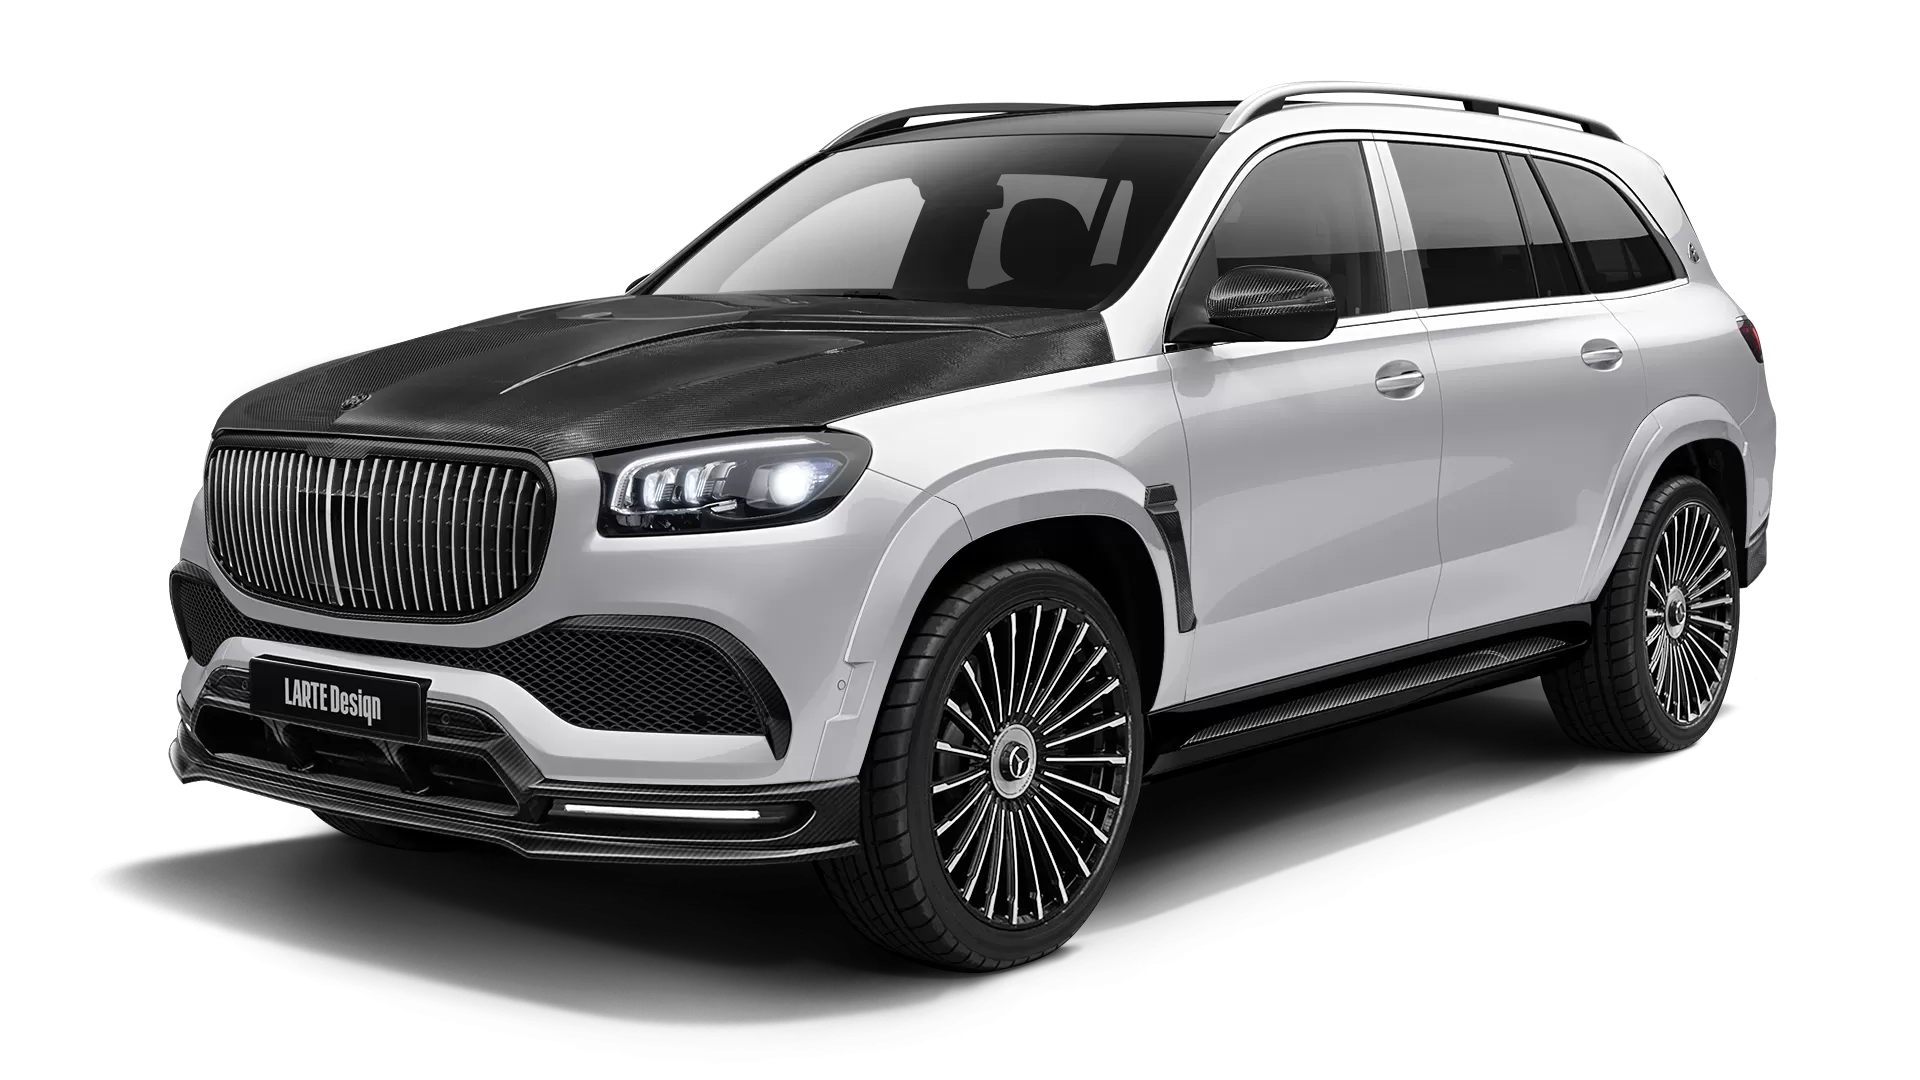 Mercedes Maybach GLS 600 with carbon body kit: front view shown in Polar White